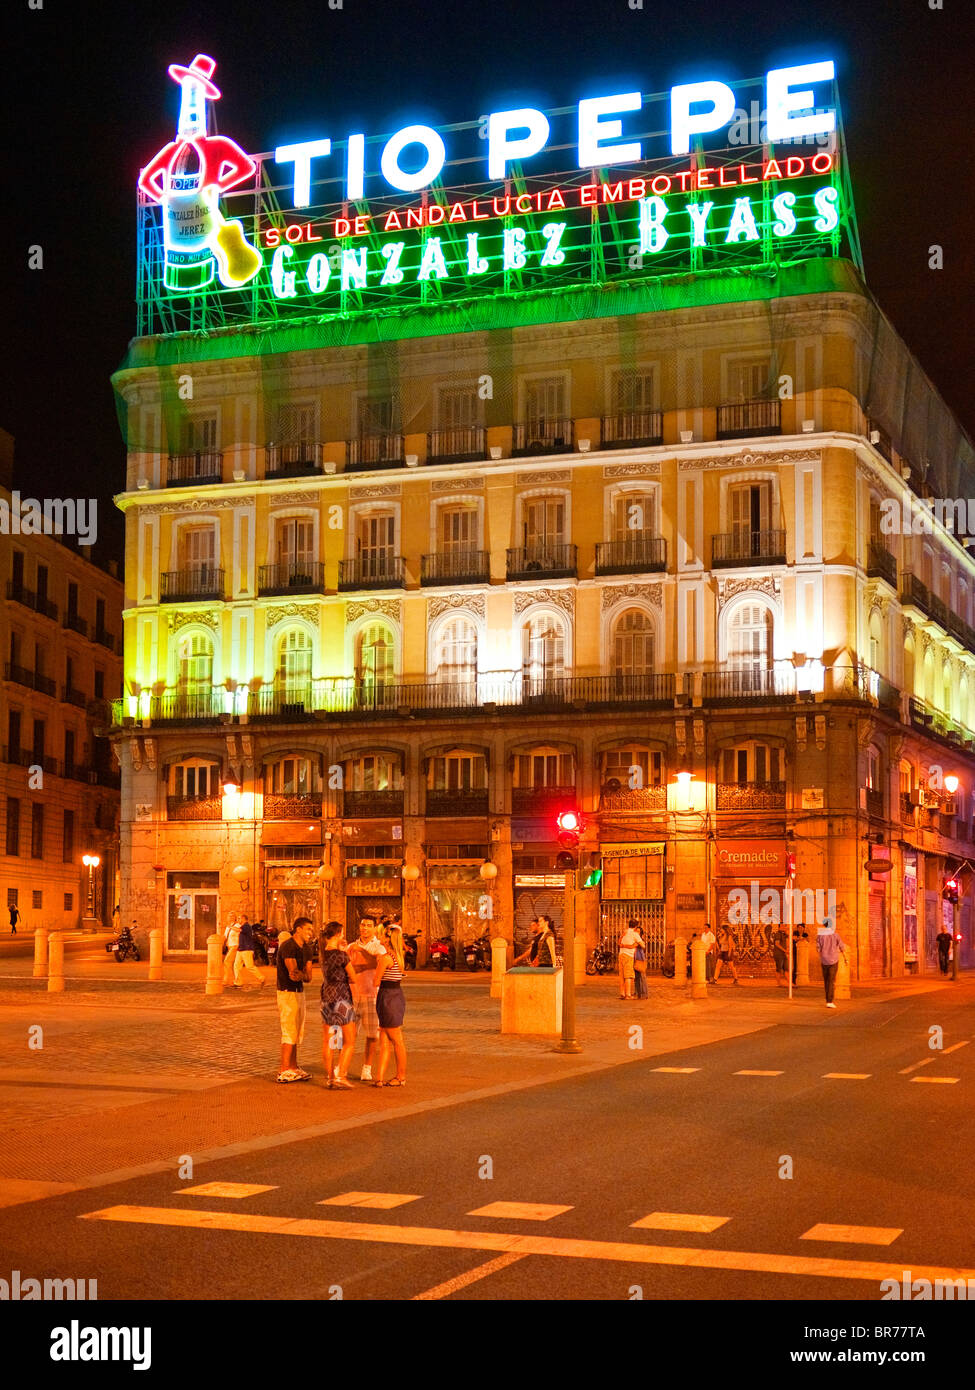 Famous Tio Pepe advertising sign at Puerta del Sol, Madrid, Spain Stock Photo